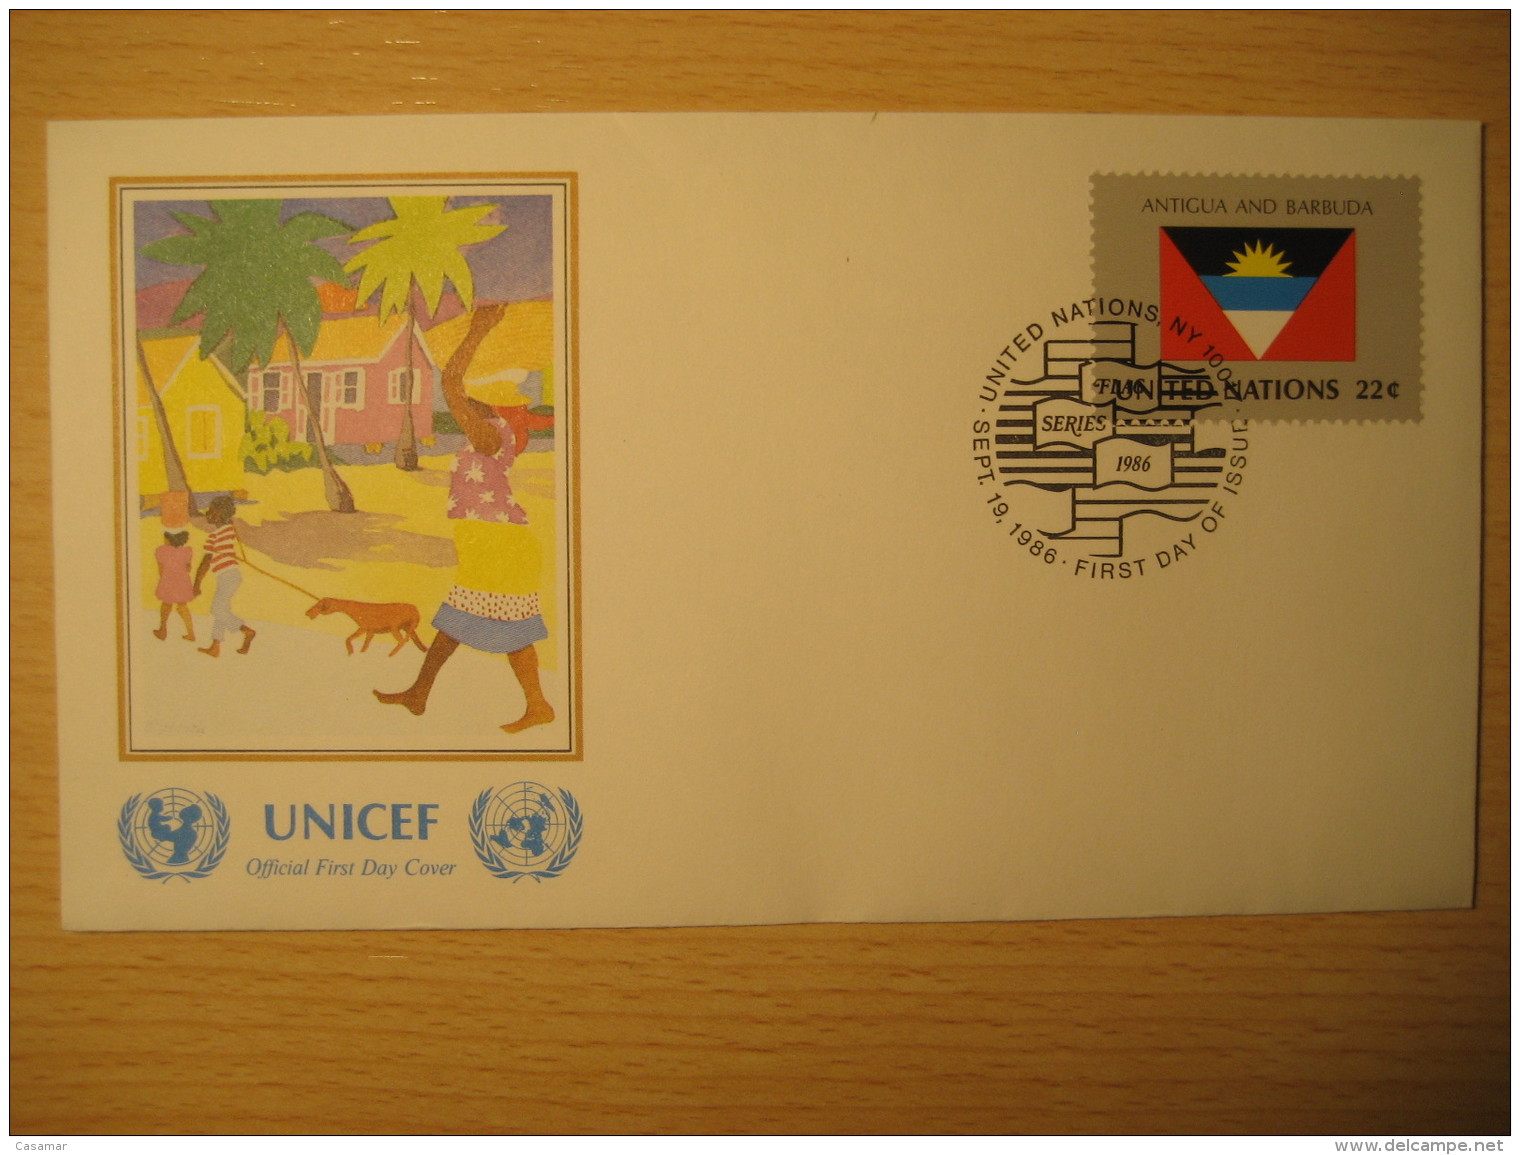 ANTIGUA AND BARBUDA New York 1986 FDC Cancel UNICEF Cover UNITED NATIONS UN NY Flag Series Flags Jackie Lafaurie - Antigua Y Barbuda (1981-...)